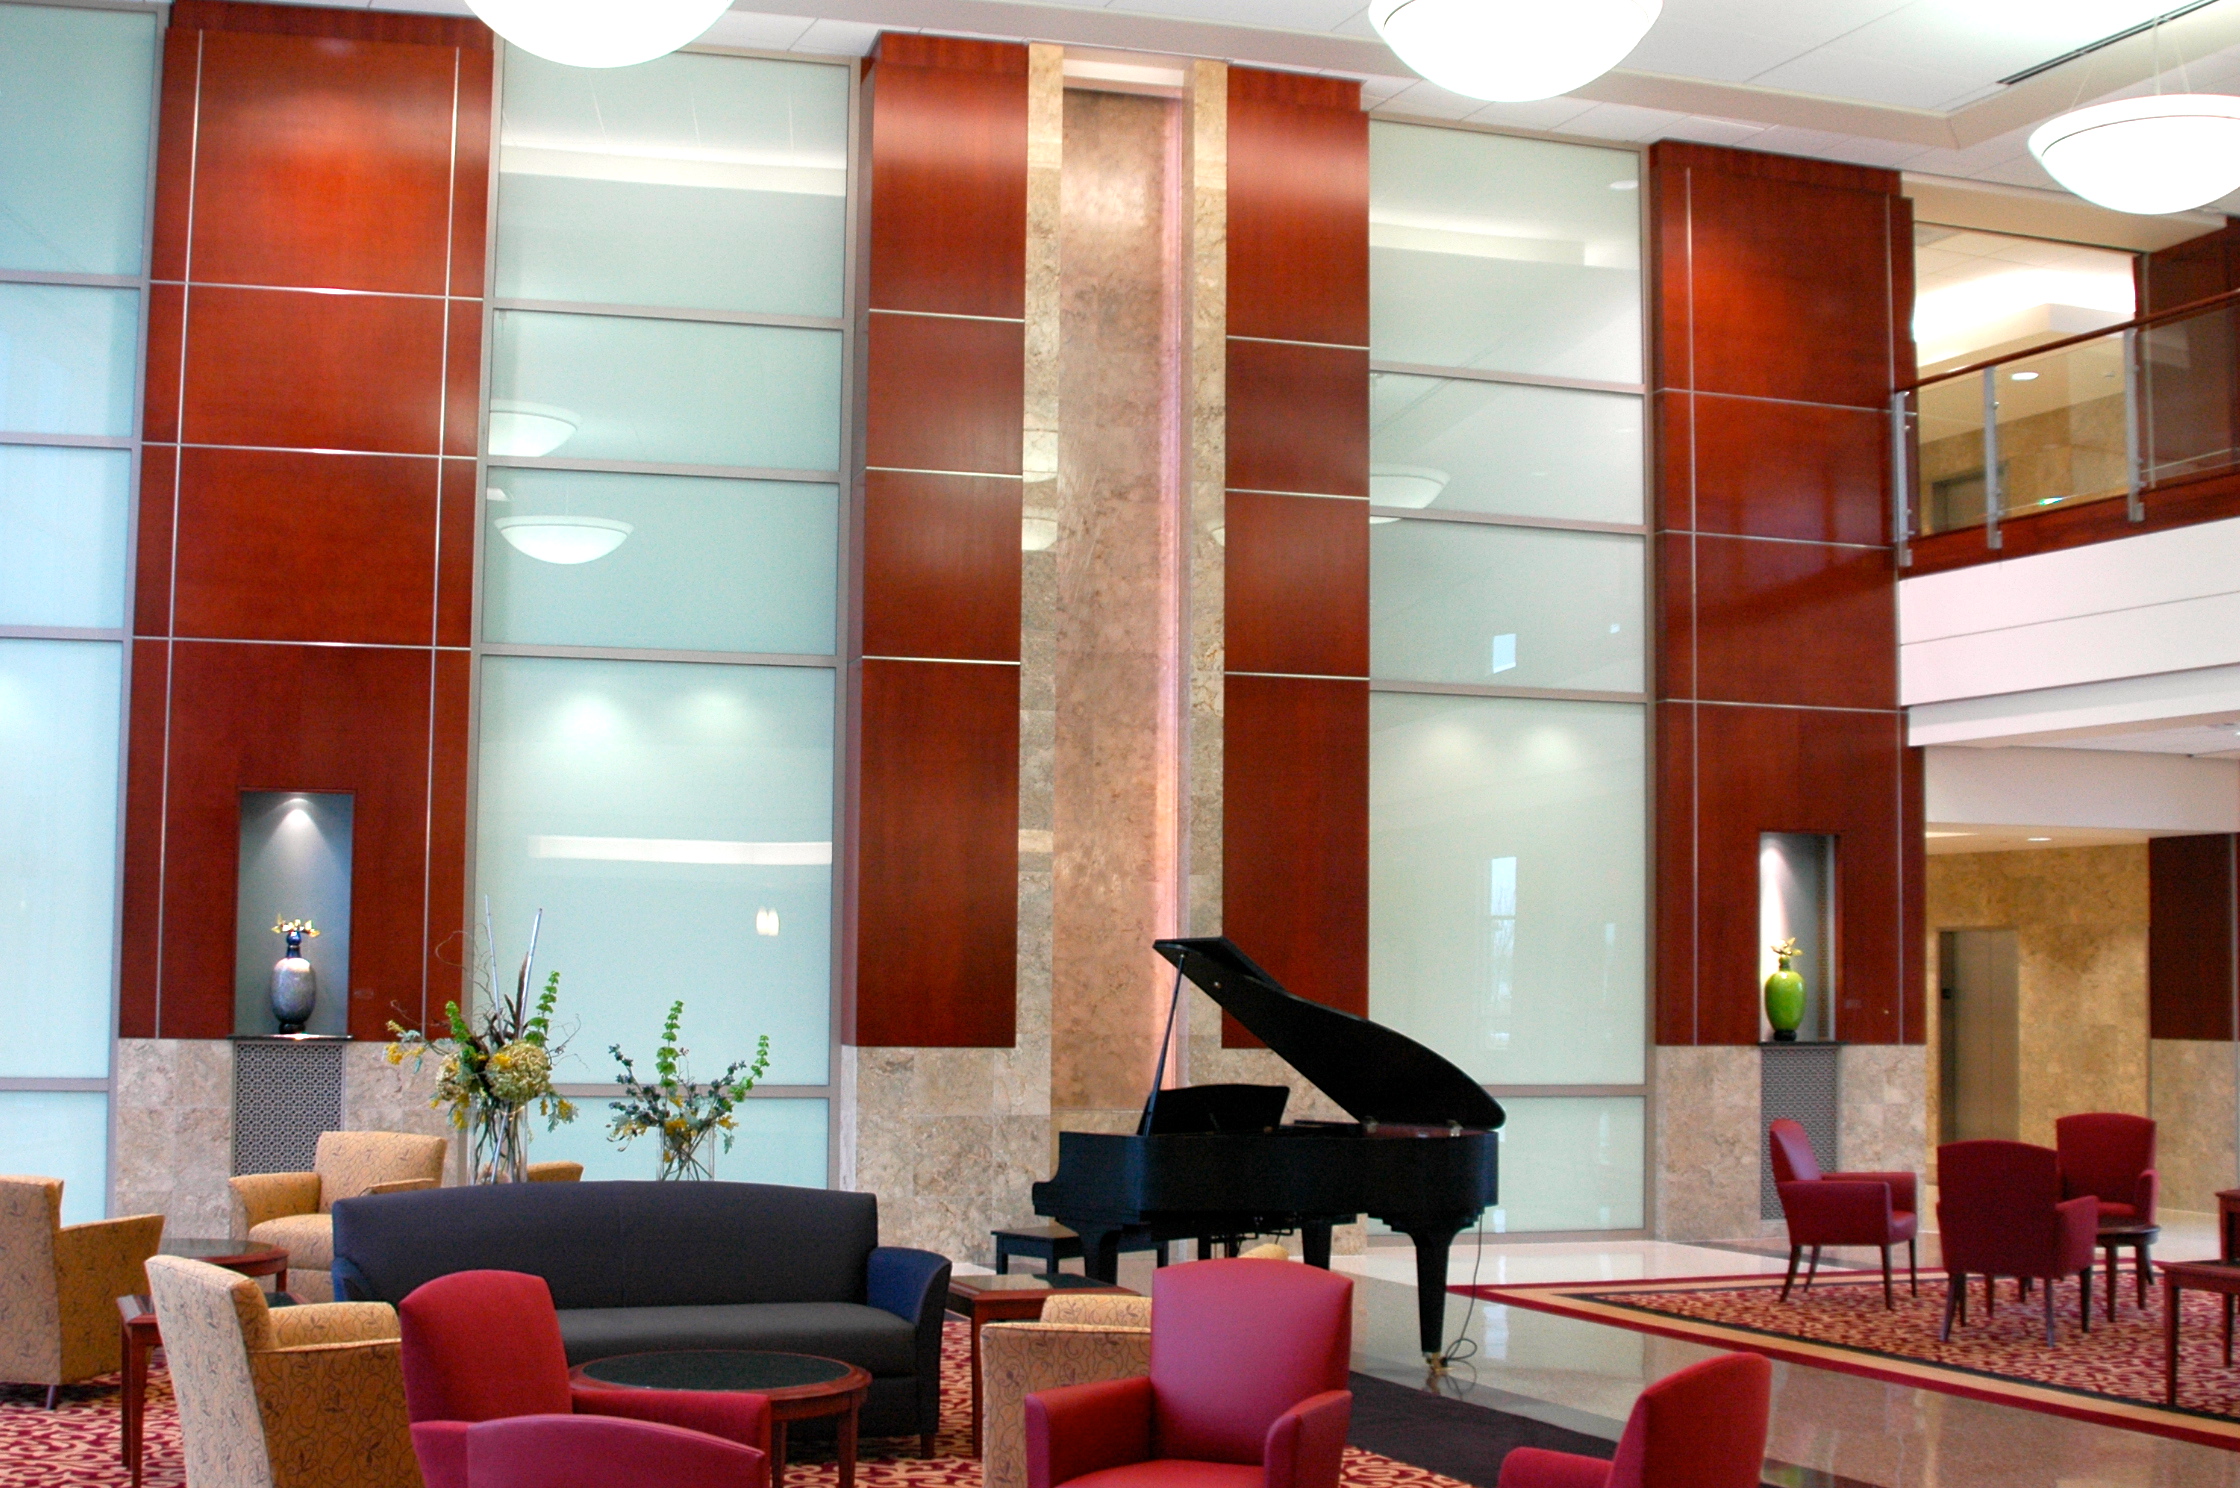 Architectural Panels in Hospital Lobby Vaughn Interior Concepts